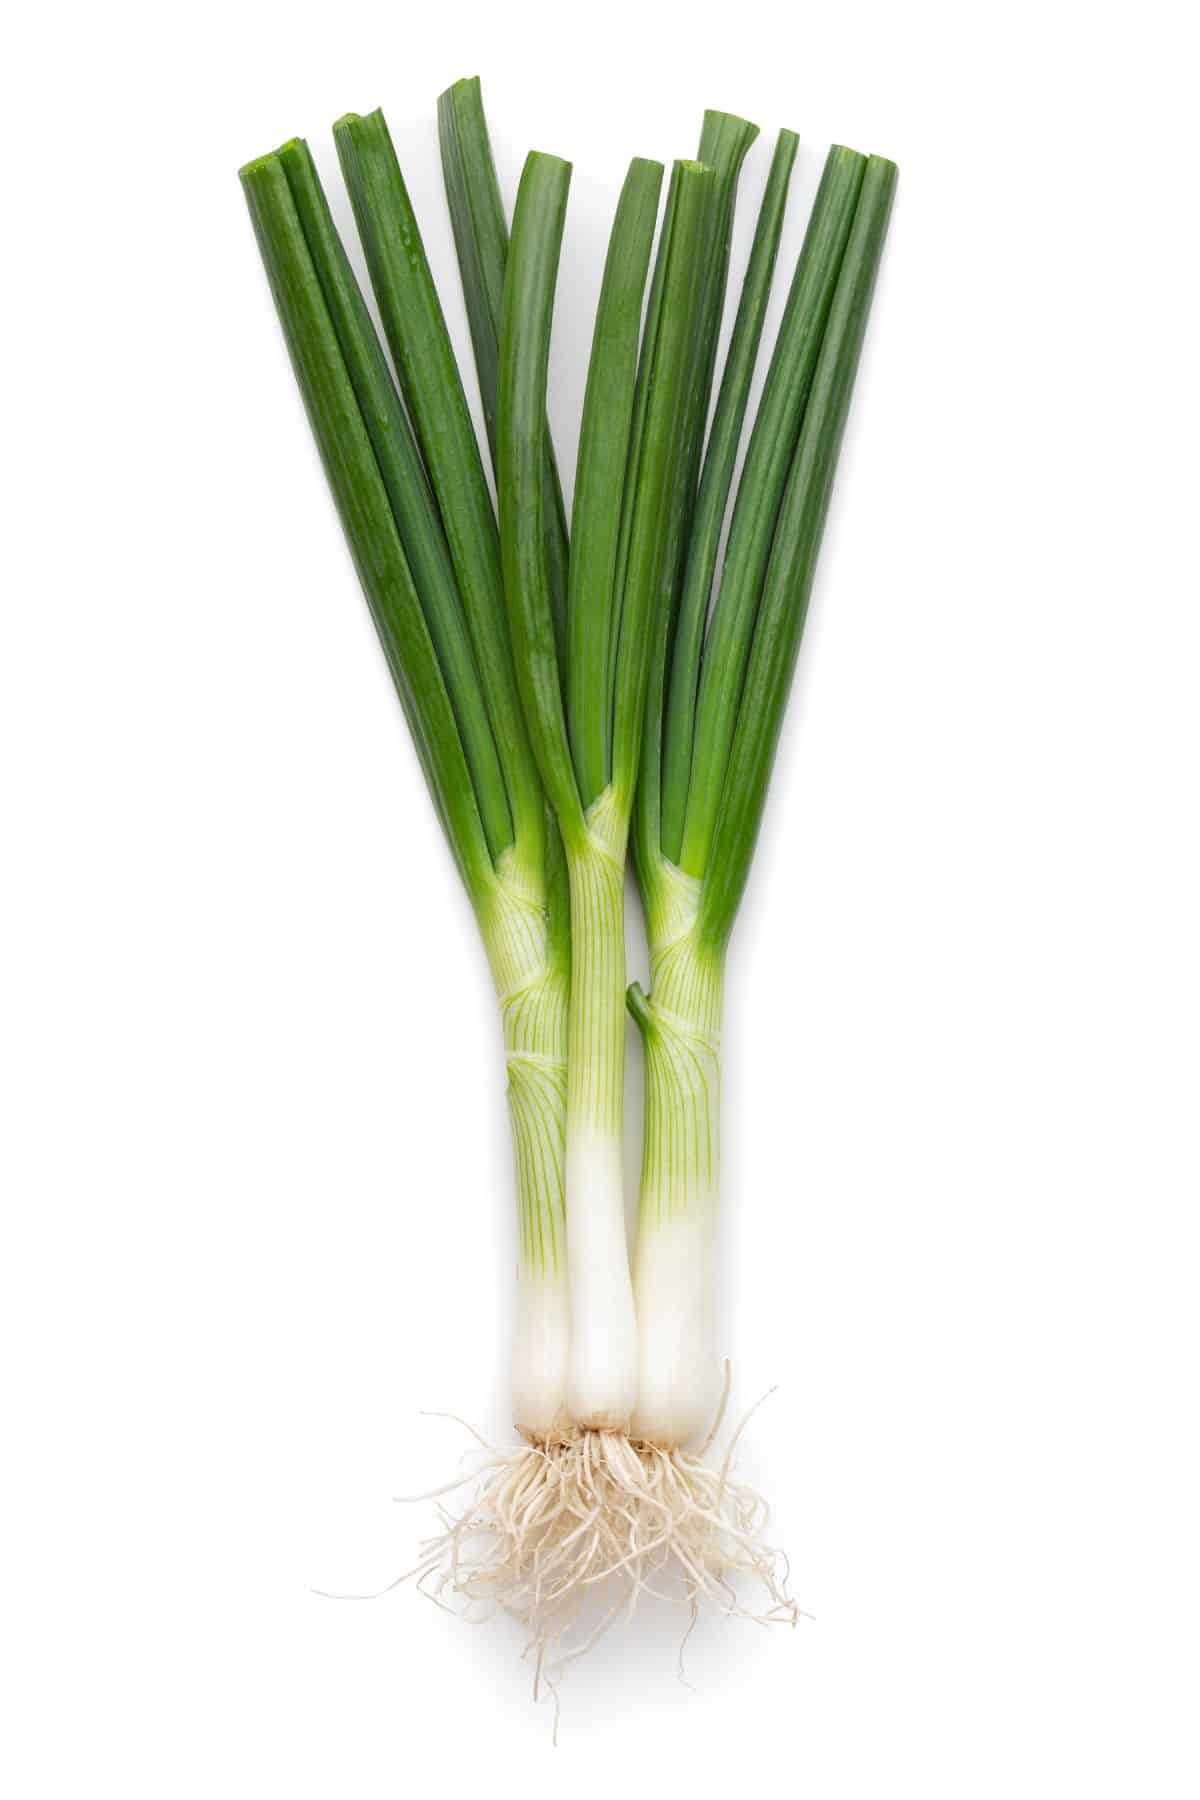 7 Best Substitute For Leeks (How And When To Use) - Fit Meal Ideas